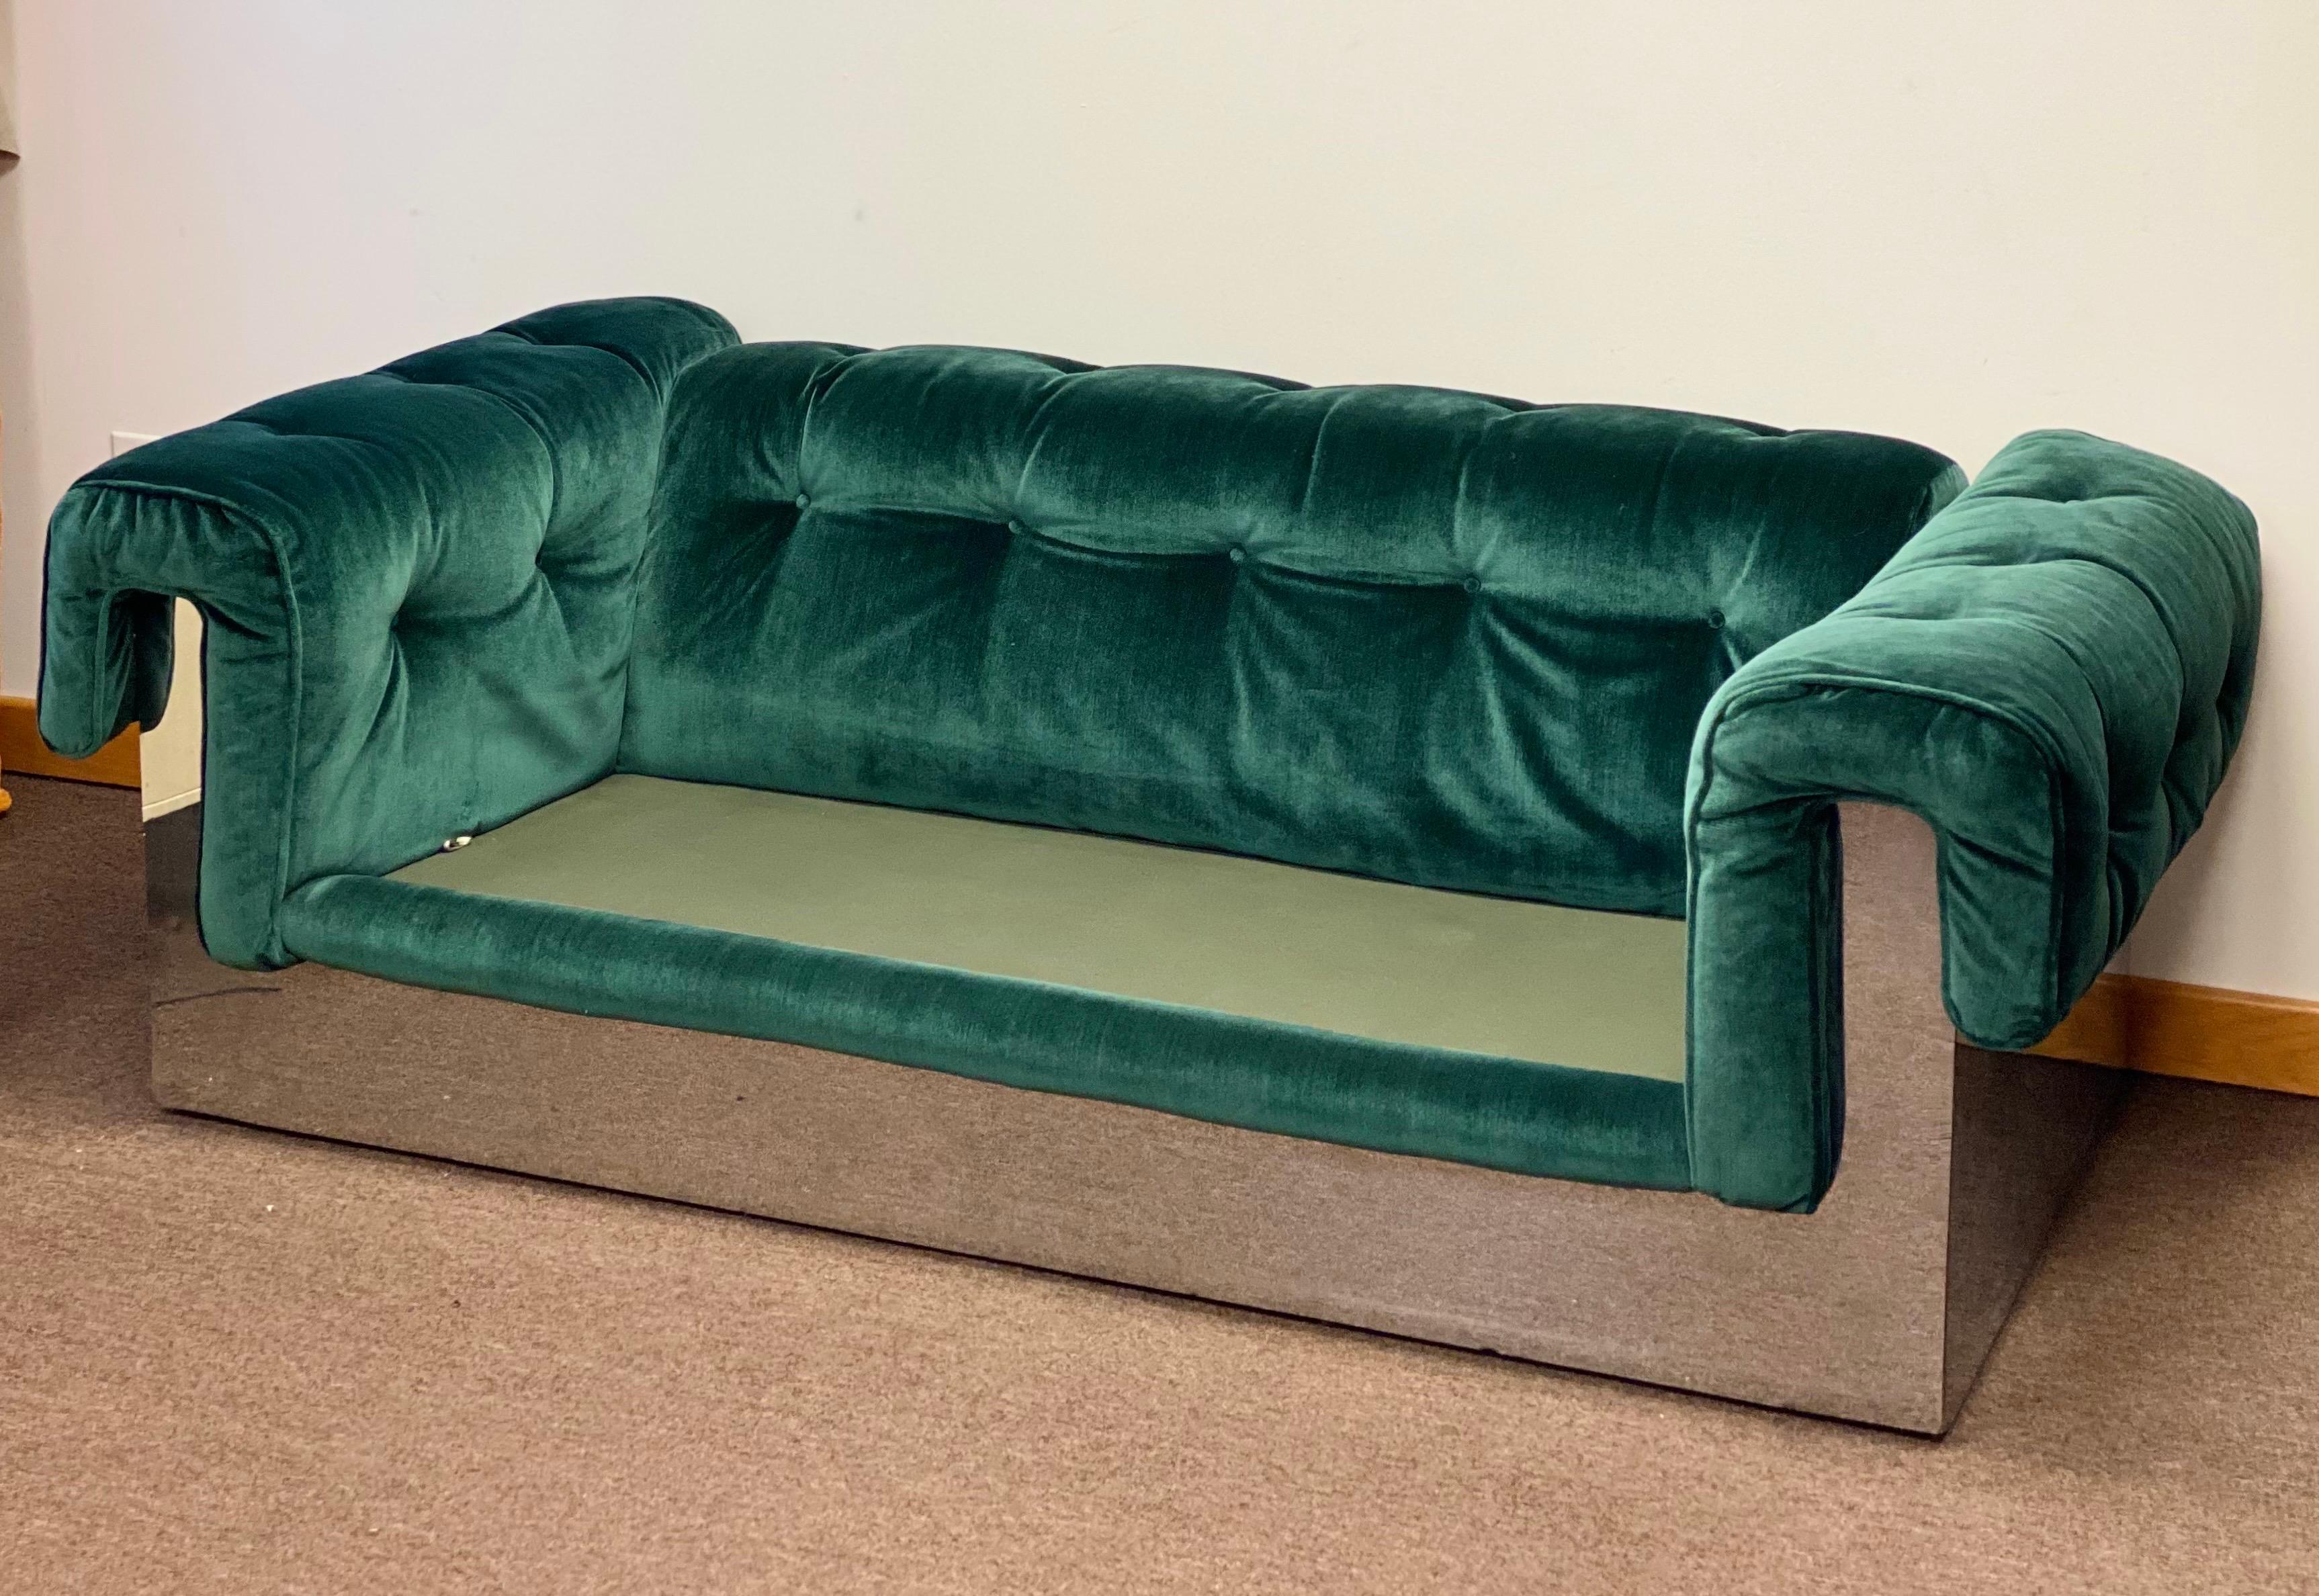 We are very pleased to offer a statement piece by modern furniture designer Milo Baughman for Thayer Coggin, circa the 1970s. A reinvented; forward-thinking chesterfield stretches out on a modern frame wrapped in a rich, emerald, green velvet